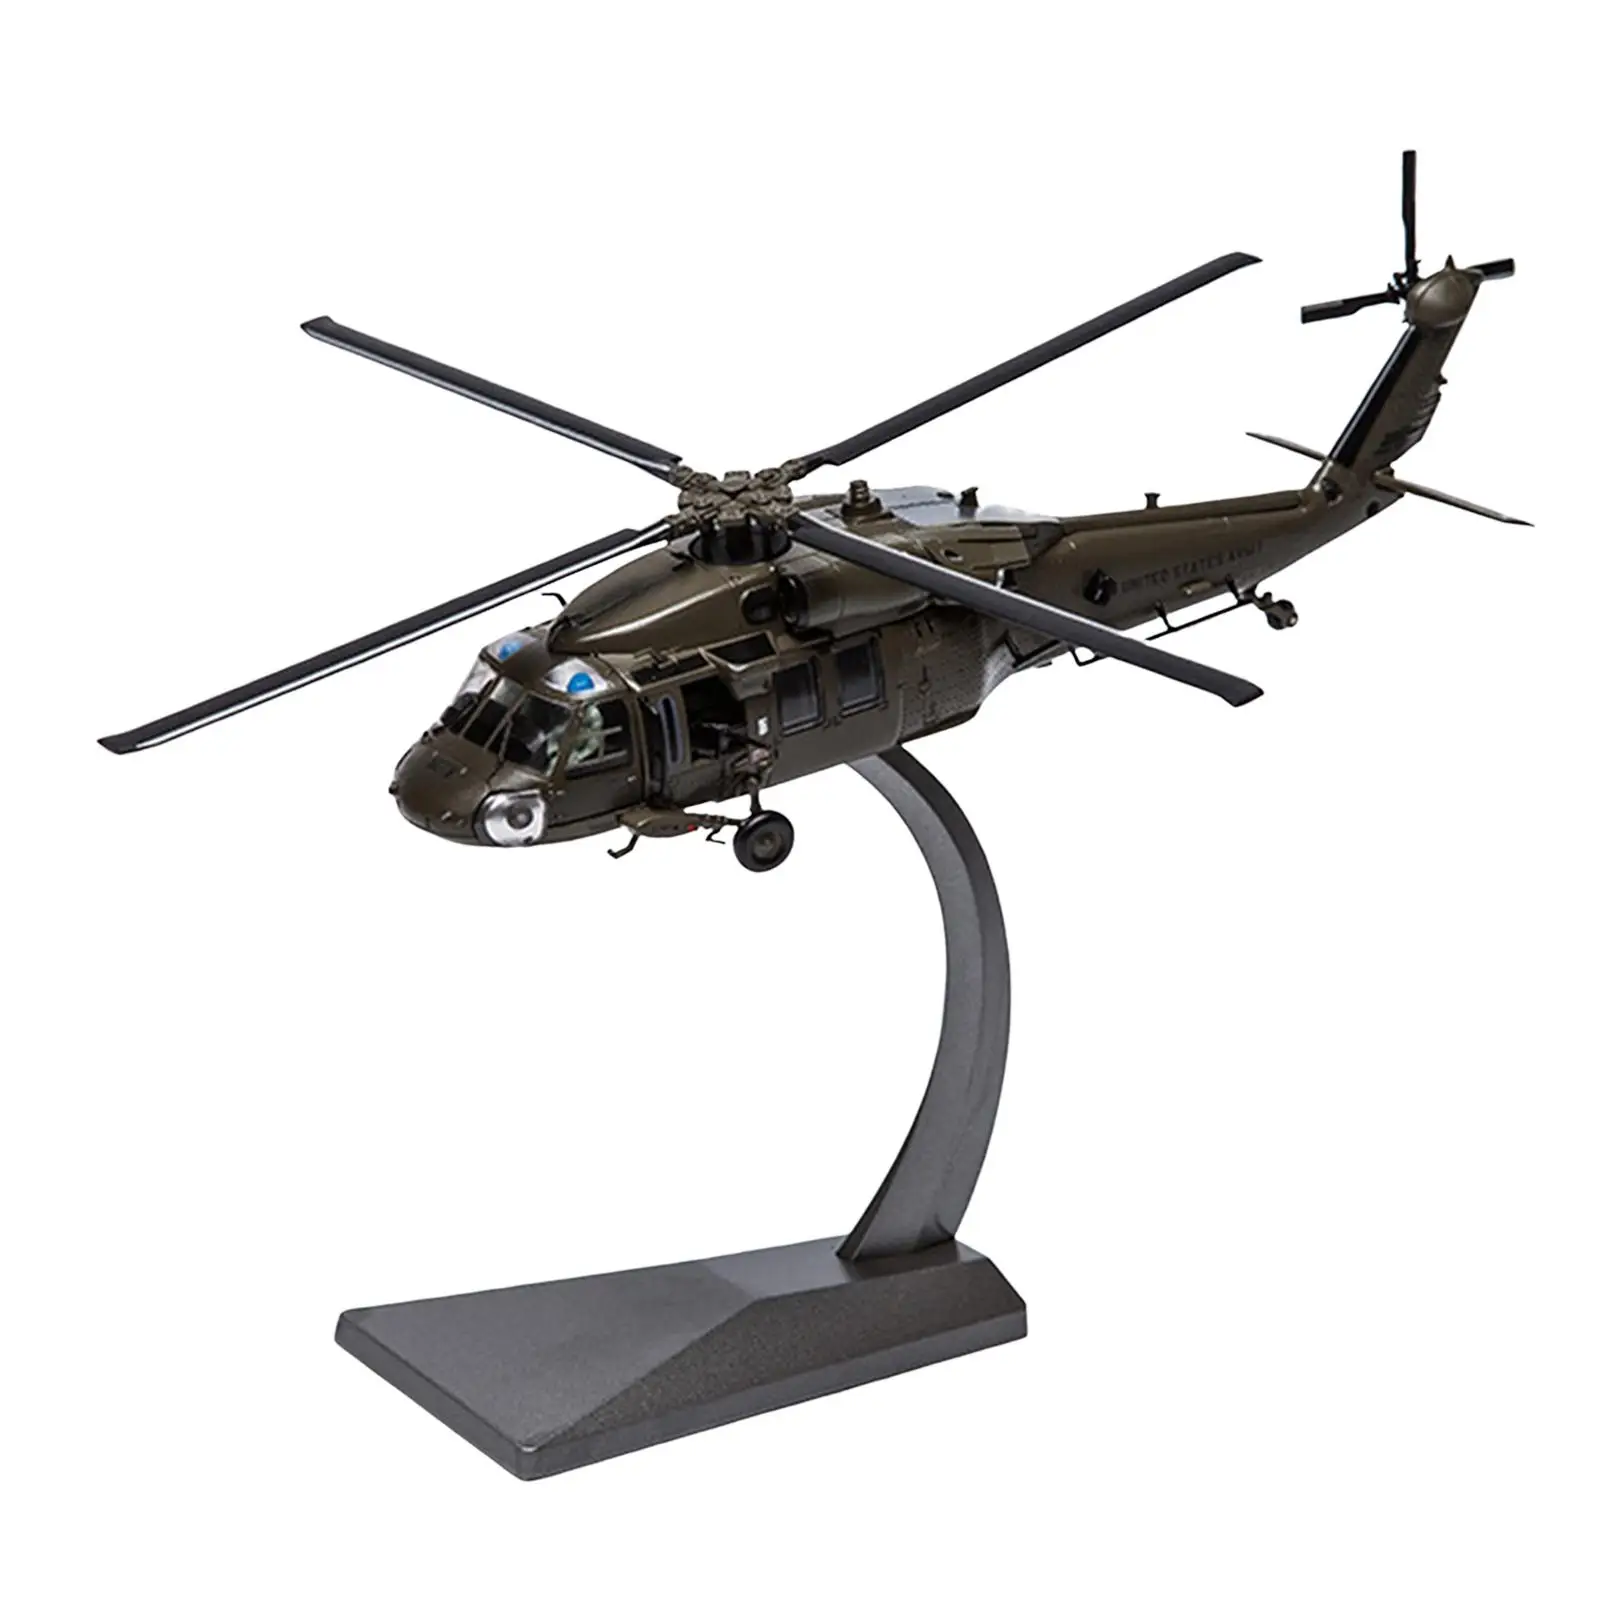 

1/72 Scale Helicopter Aircraft Diecast Toy with Display Stand Aviation Model Airplane Plane Collectables Commemorate Decoration